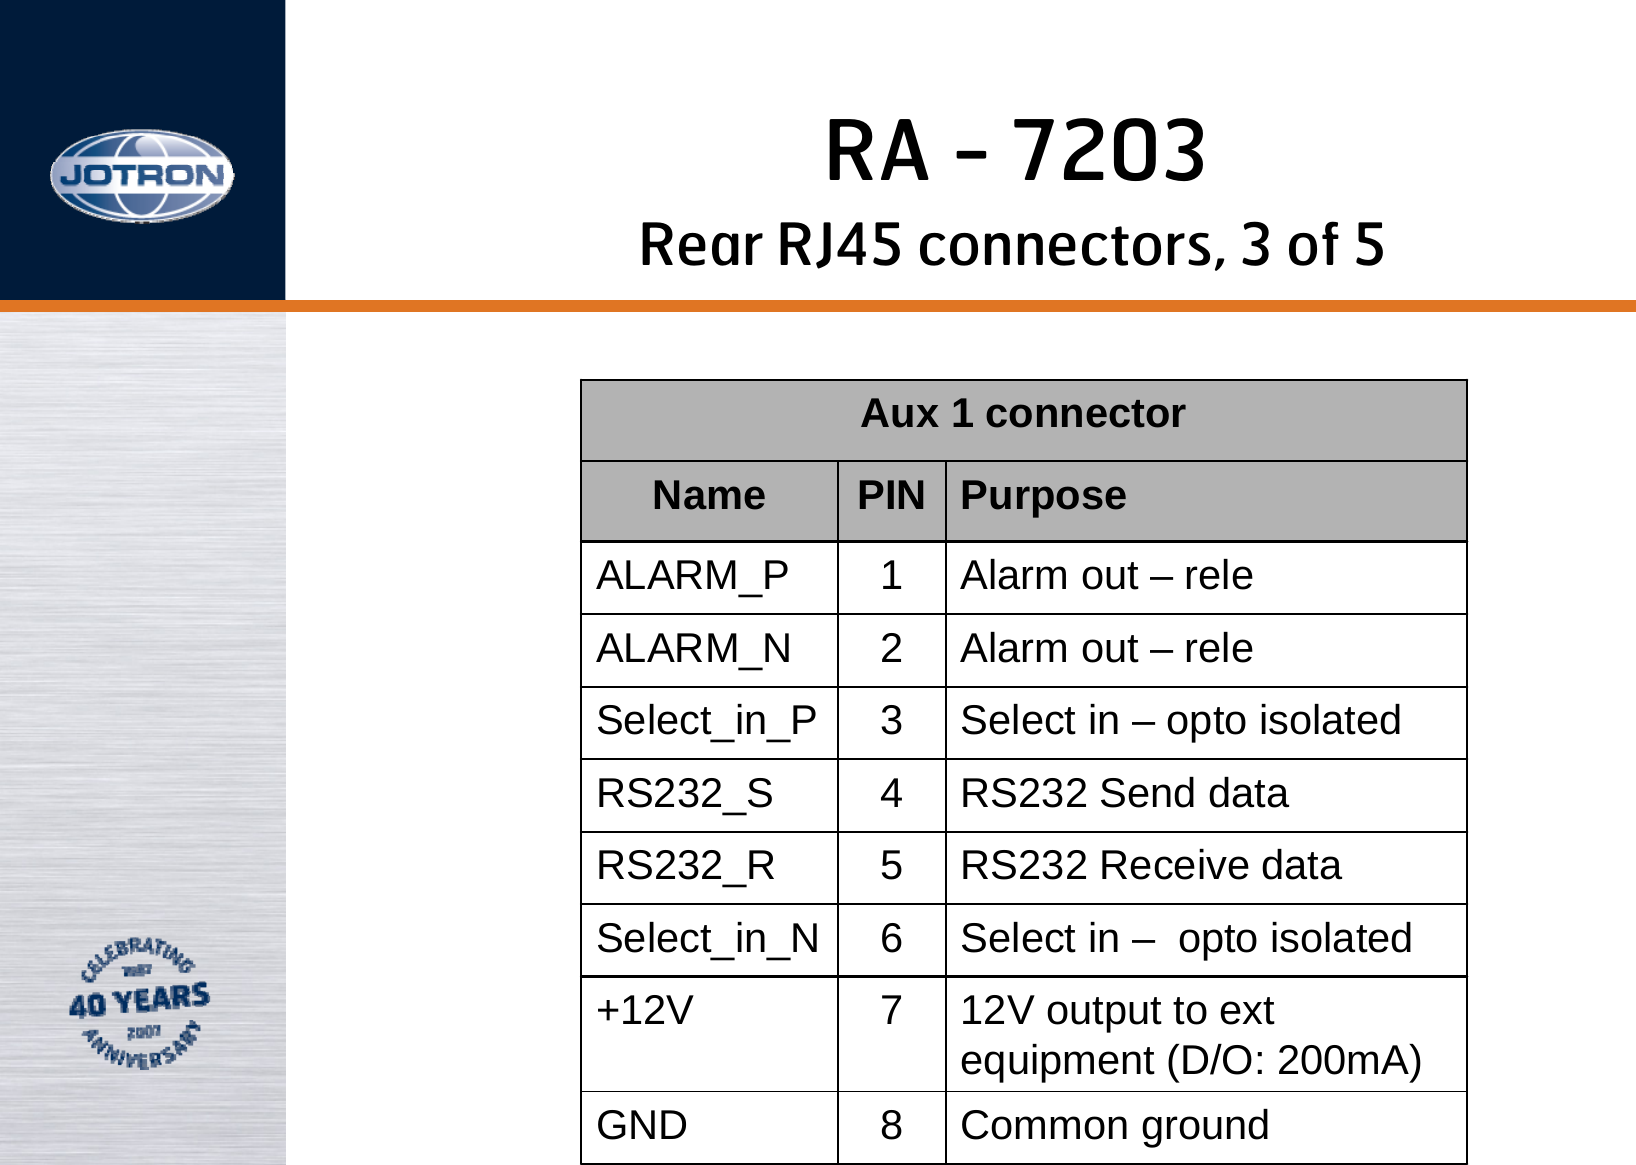 RA - 7203Aux 1 connectorName PIN PurposeALARM_P 1Alarm out – releALARM_N 2Alarm out – releSelect_in_P 3Select in – opto isolatedRS232_S 4RS232 Send dataRS232_R 5RS232 Receive dataSelect_in_N 6Select in – opto isolated+12V 712V output to extequipment (D/O: 200mA)GND 8Common ground Rear RJ45 connectors, 3 of 5